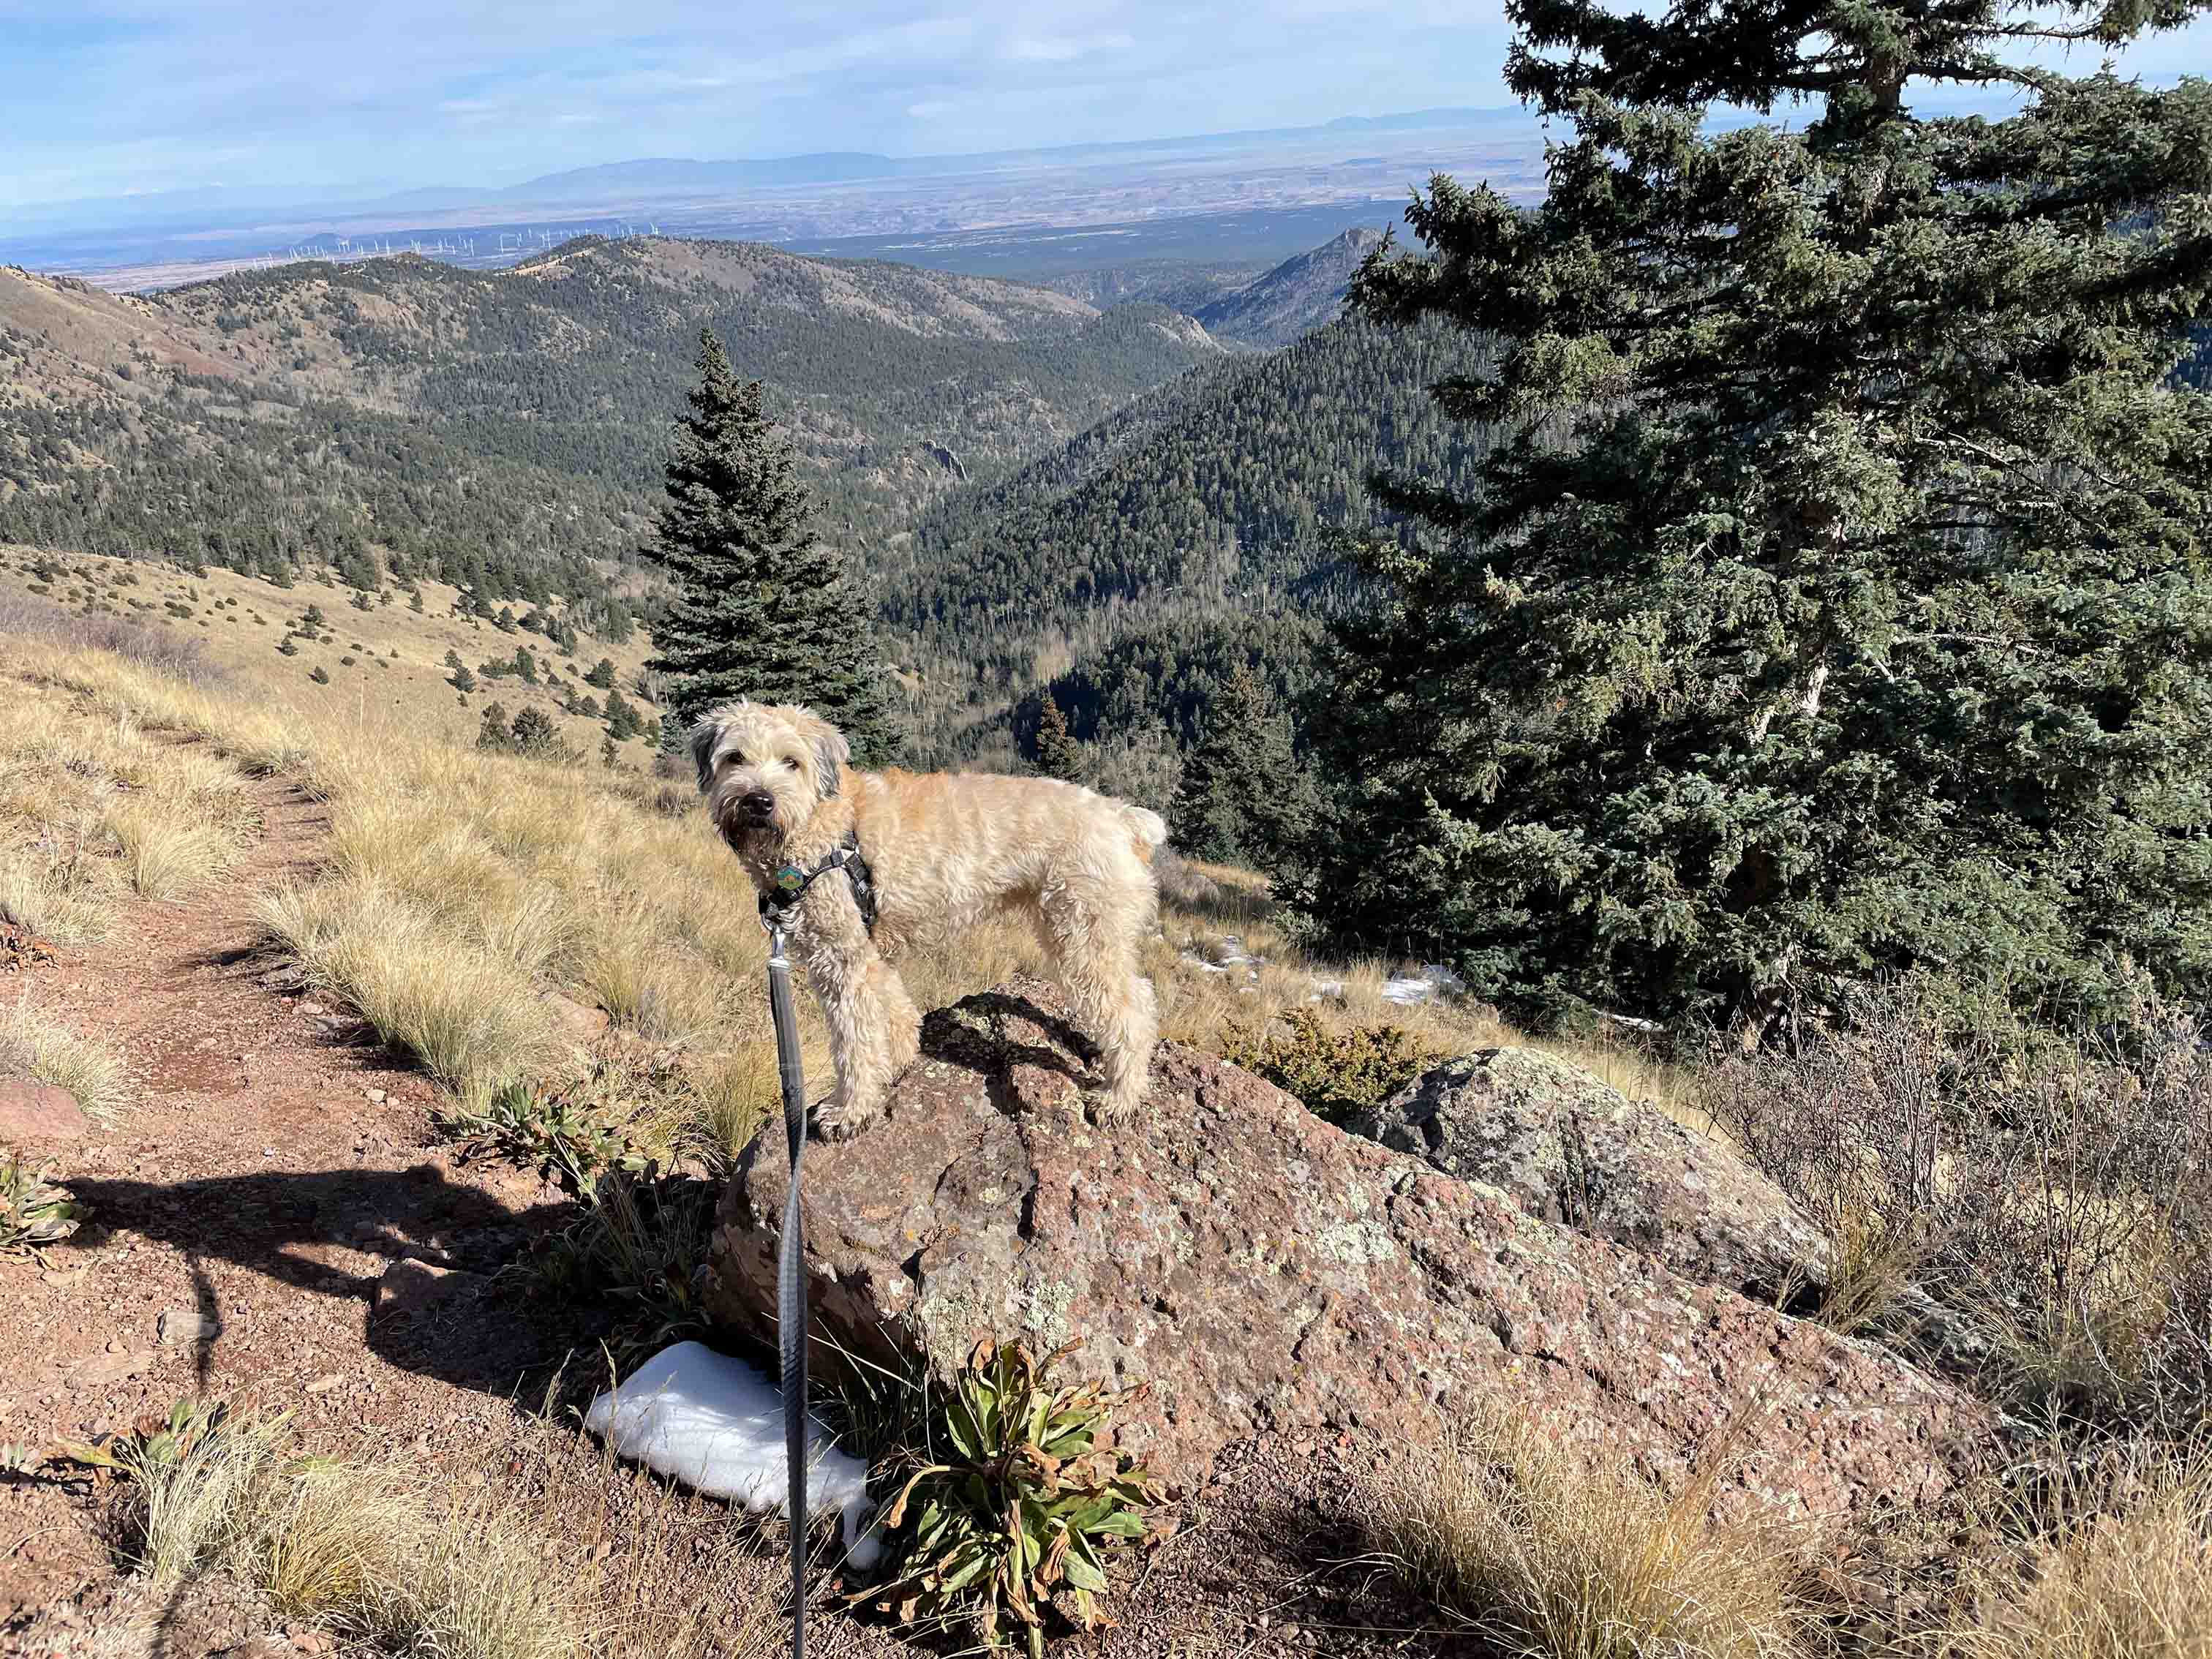 Xita, a dog, hiking in the mountains of New Mexico.